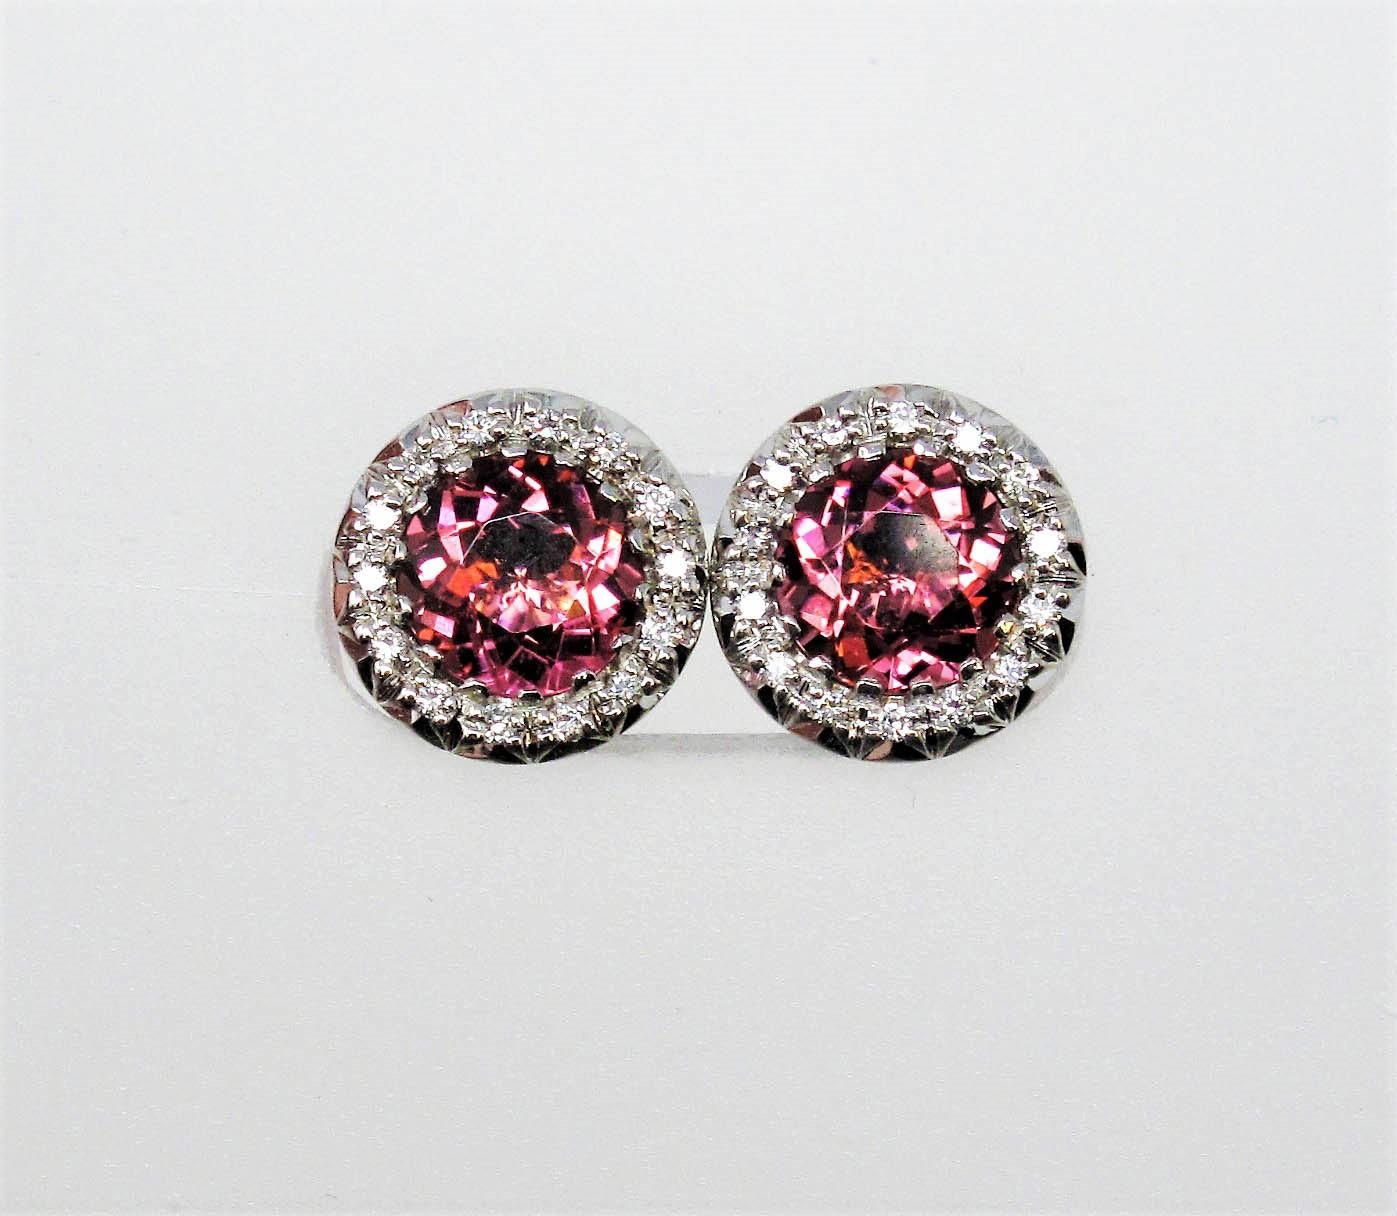 These incredible tourmaline and diamond halo studs offer substantial sparkle and glamour without being over the top, while their simple yet elegant design can be worn with just about anything. The incredible rich pink color of the tourmaline really